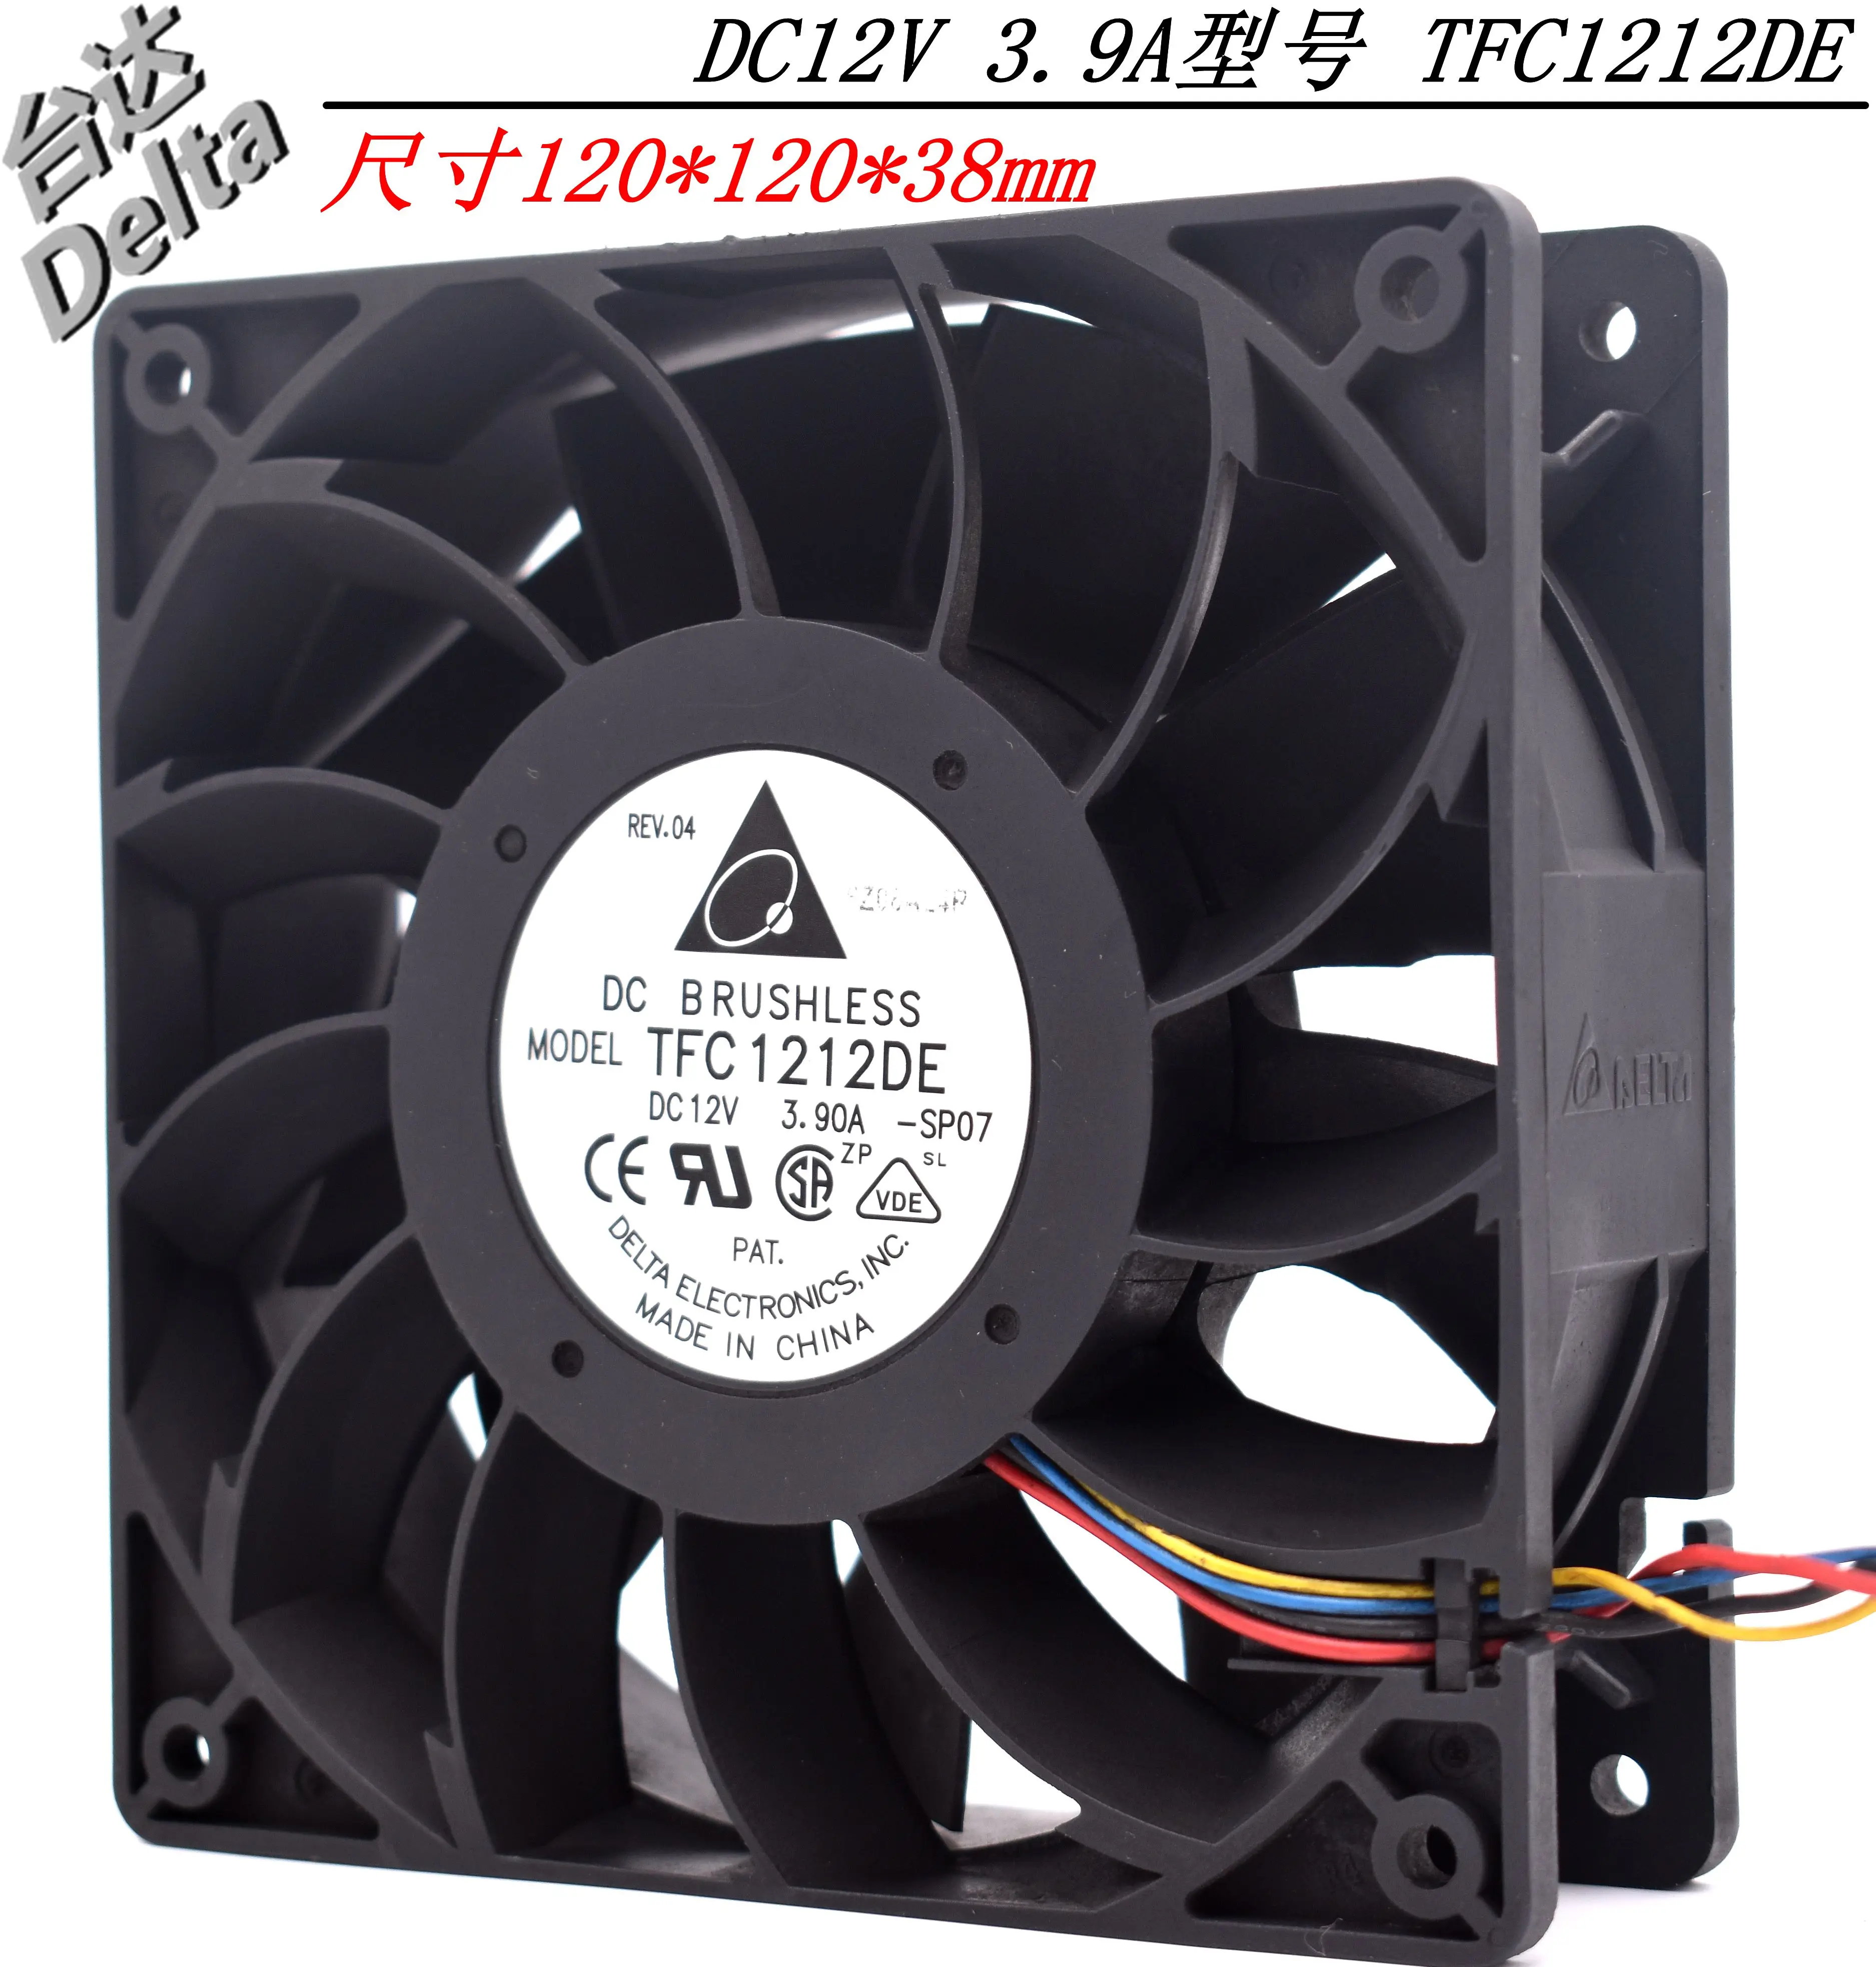 TFC1212DE 120mm DC 12V 5200RPM 252CFM For Bitcoin Miner Powerful Server Case AXIAL cooling Fan